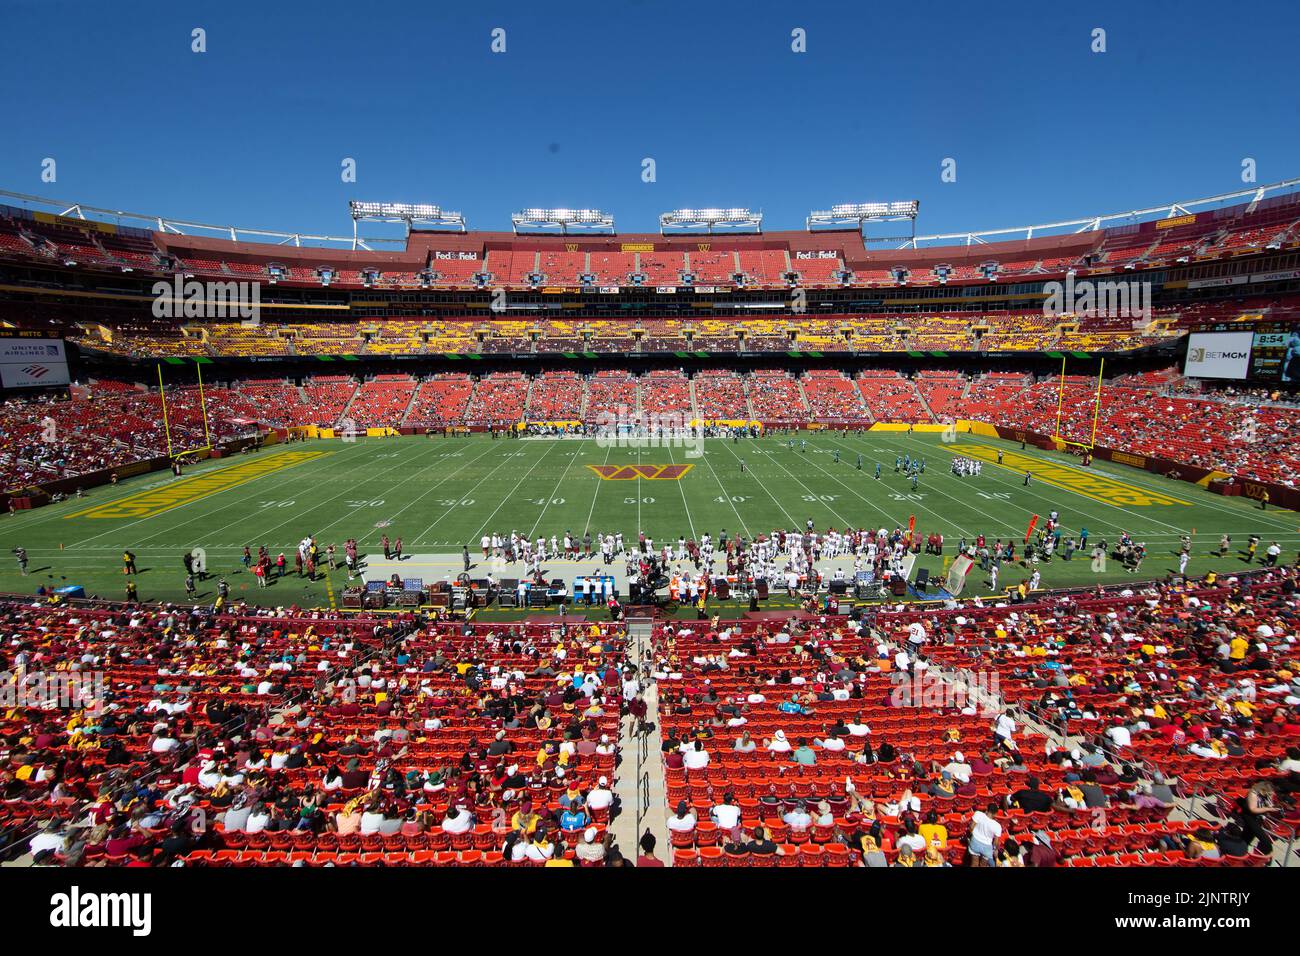 Landover, United States. 13th Aug, 2022. Panorama view during NFL Preseason game between the Carolina Panthers vs the Washington Commanders at FedEx Field in Landover, MD, on Aug. 13, 2022. The Panthers defeated the Commanders 23-21. This is the initial game with the new team name since last season when the Washington franchise was named 'Football Team'. (Max Siker/Image of Sport) Photo via Credit: Newscom/Alamy Live News Stock Photo